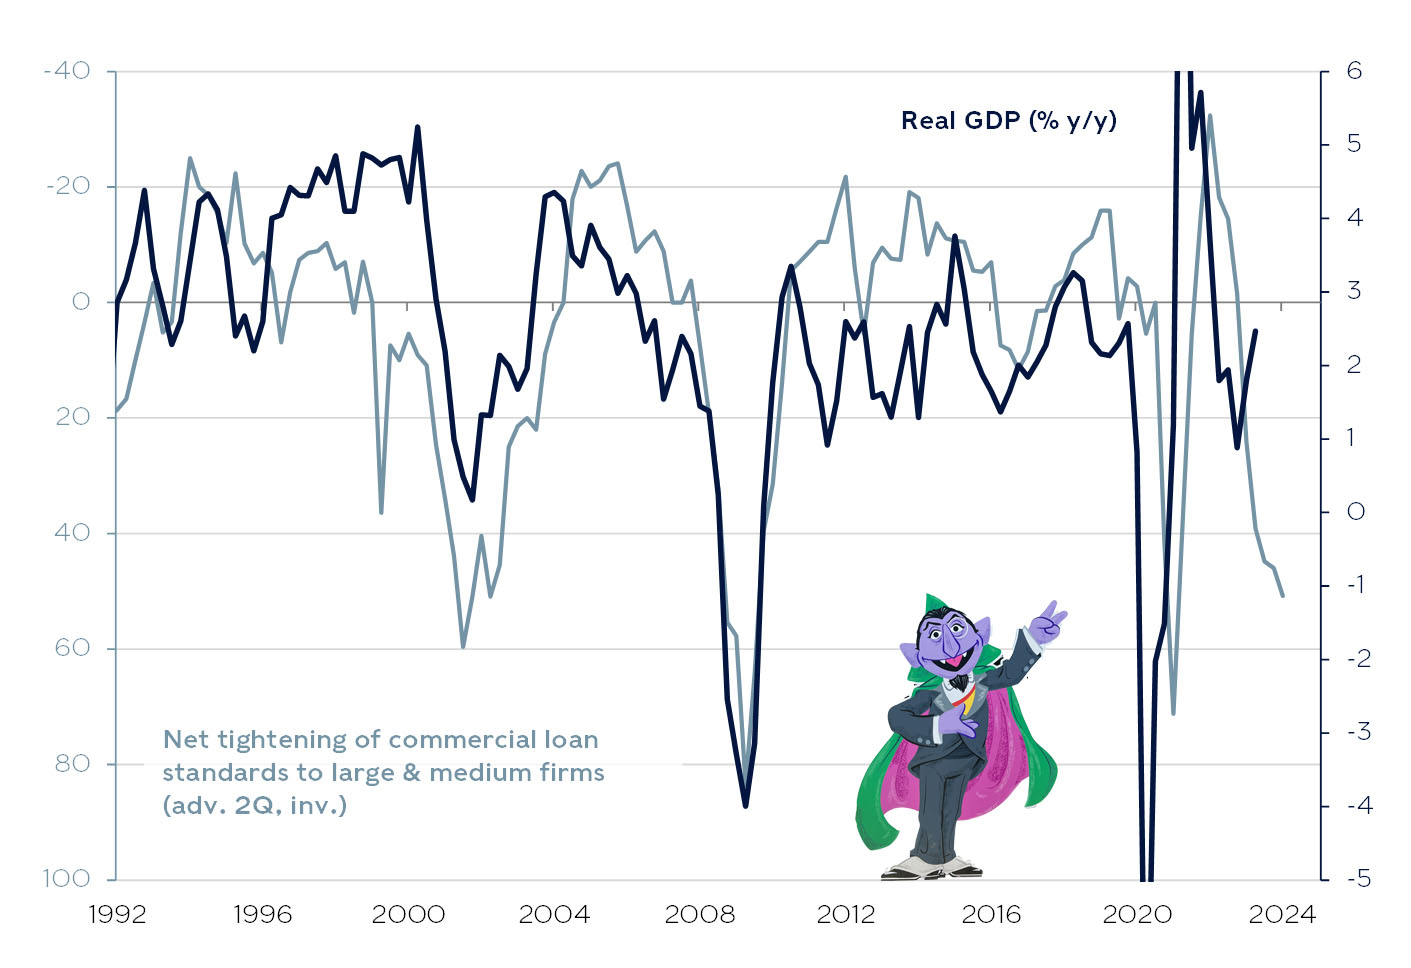 GDP usually falls six months after lending standards tighten 